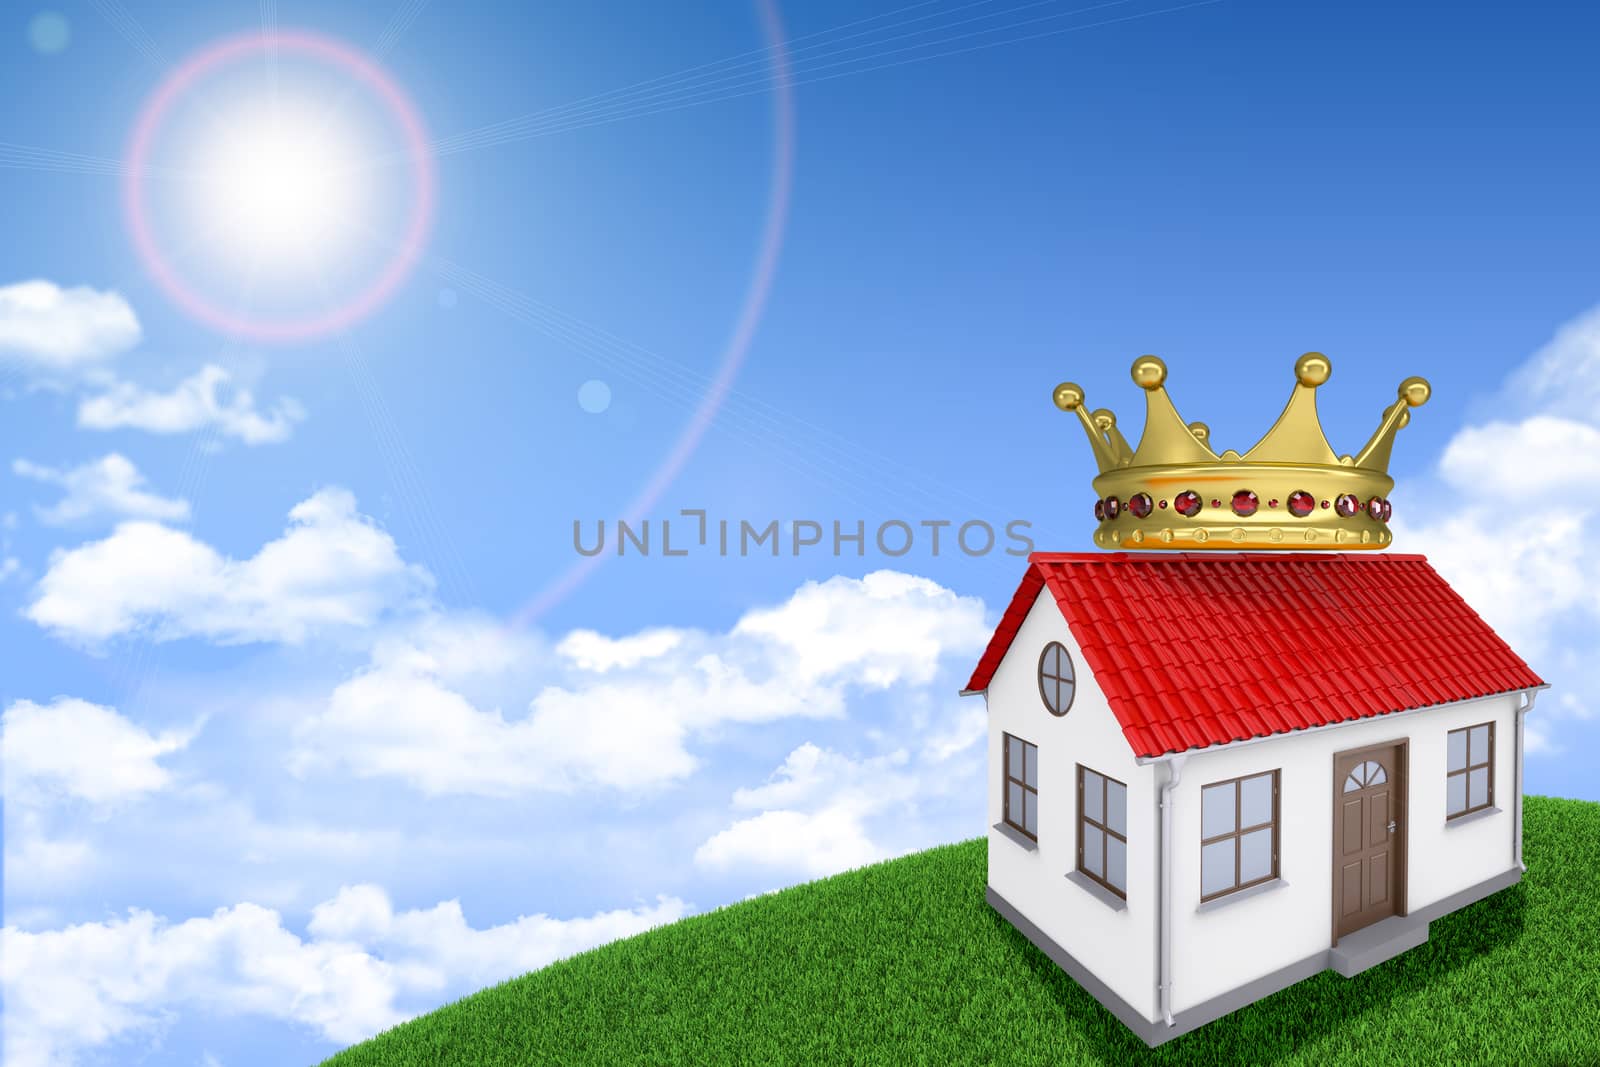 White house on green grassy hill with red roof, crown. Background sun shines brightly. Blue sky